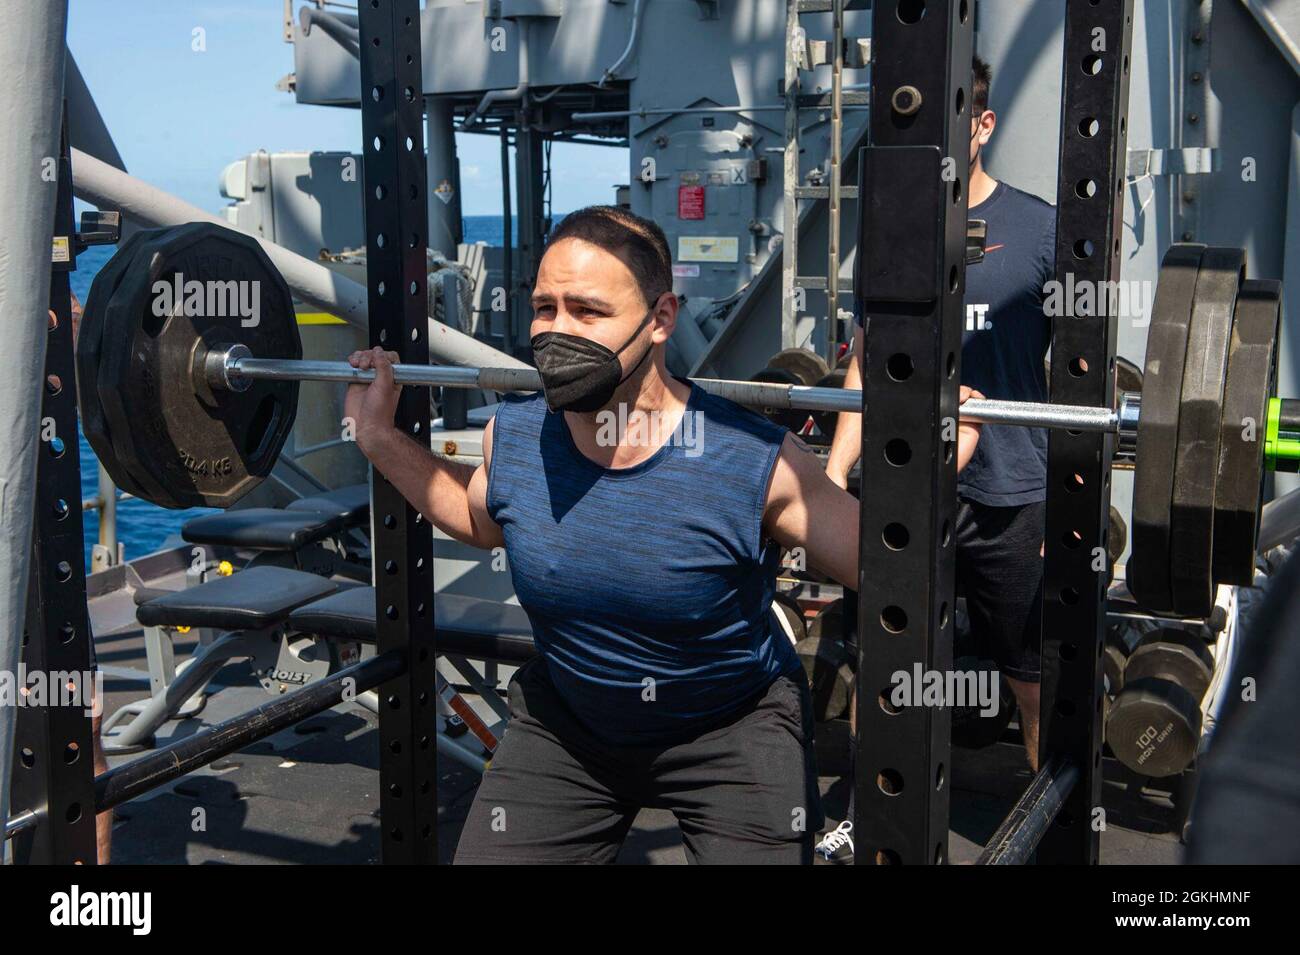 210425-N-RG587-1012 ATLANTIC OCEAN (April 25, 2021) Fire Controlman (Aeigis) 2nd Class Gilberto Ramirez, from Dallas, participates in a weight-lifting competition aboard the Ticonderoga-class guided-missile cruiser USS Vella Gulf (CG 72), April 25, 2021. Vella Gulf is operating in the Atlantic Ocean in support of naval operations to maintain maritime stability and security in order to ensure access, deter aggression and defend U.S., allied and partner interests. Stock Photo